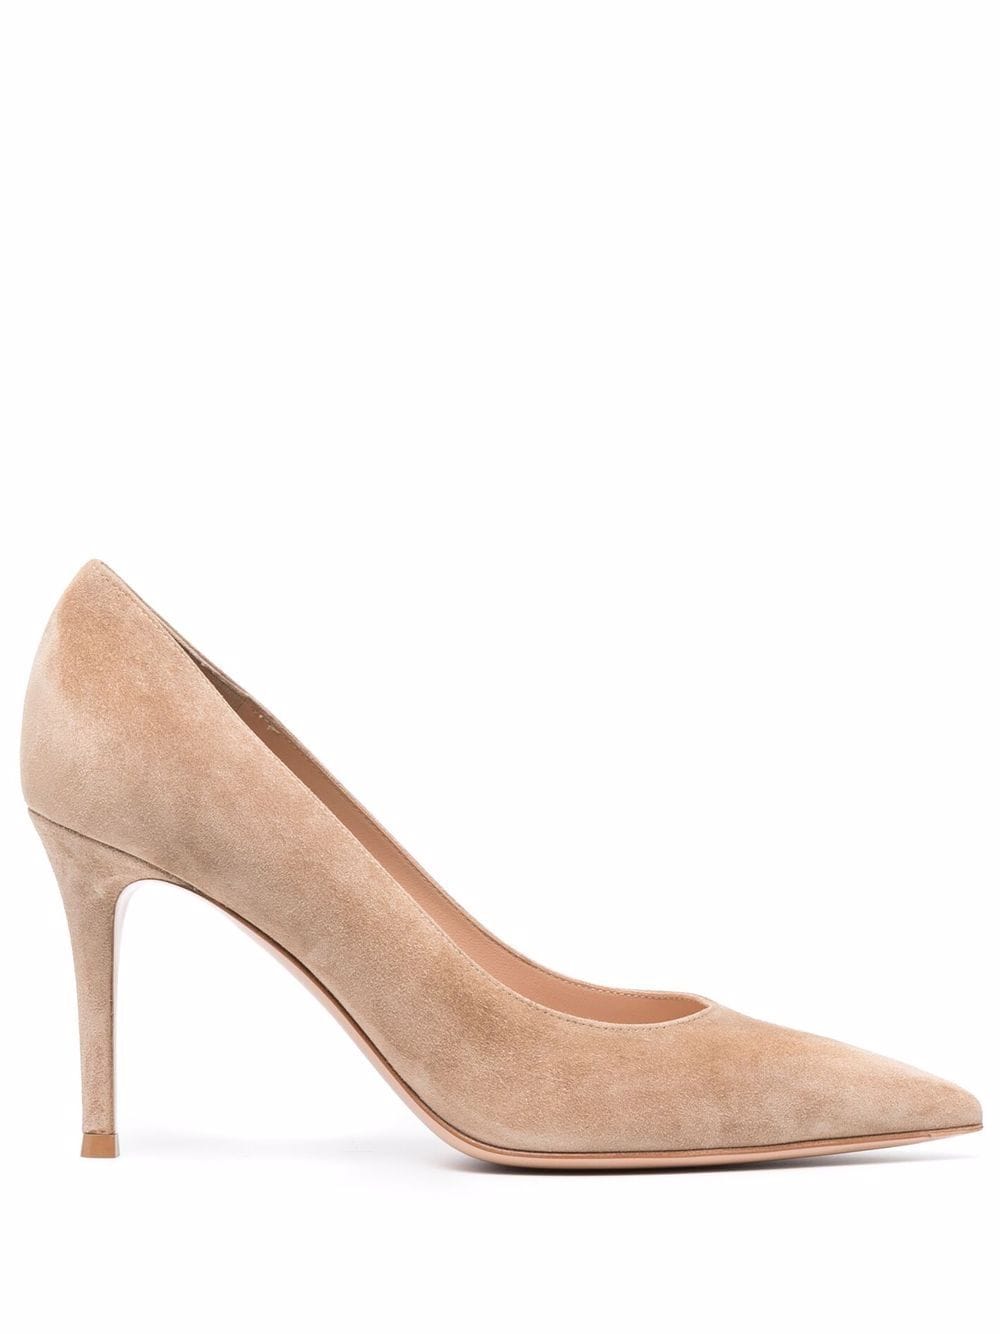 GIANVITO ROSSI Beige Suede Pumps for Women - High Heel Pointed Toe Shoes for Fall/Winter 2023